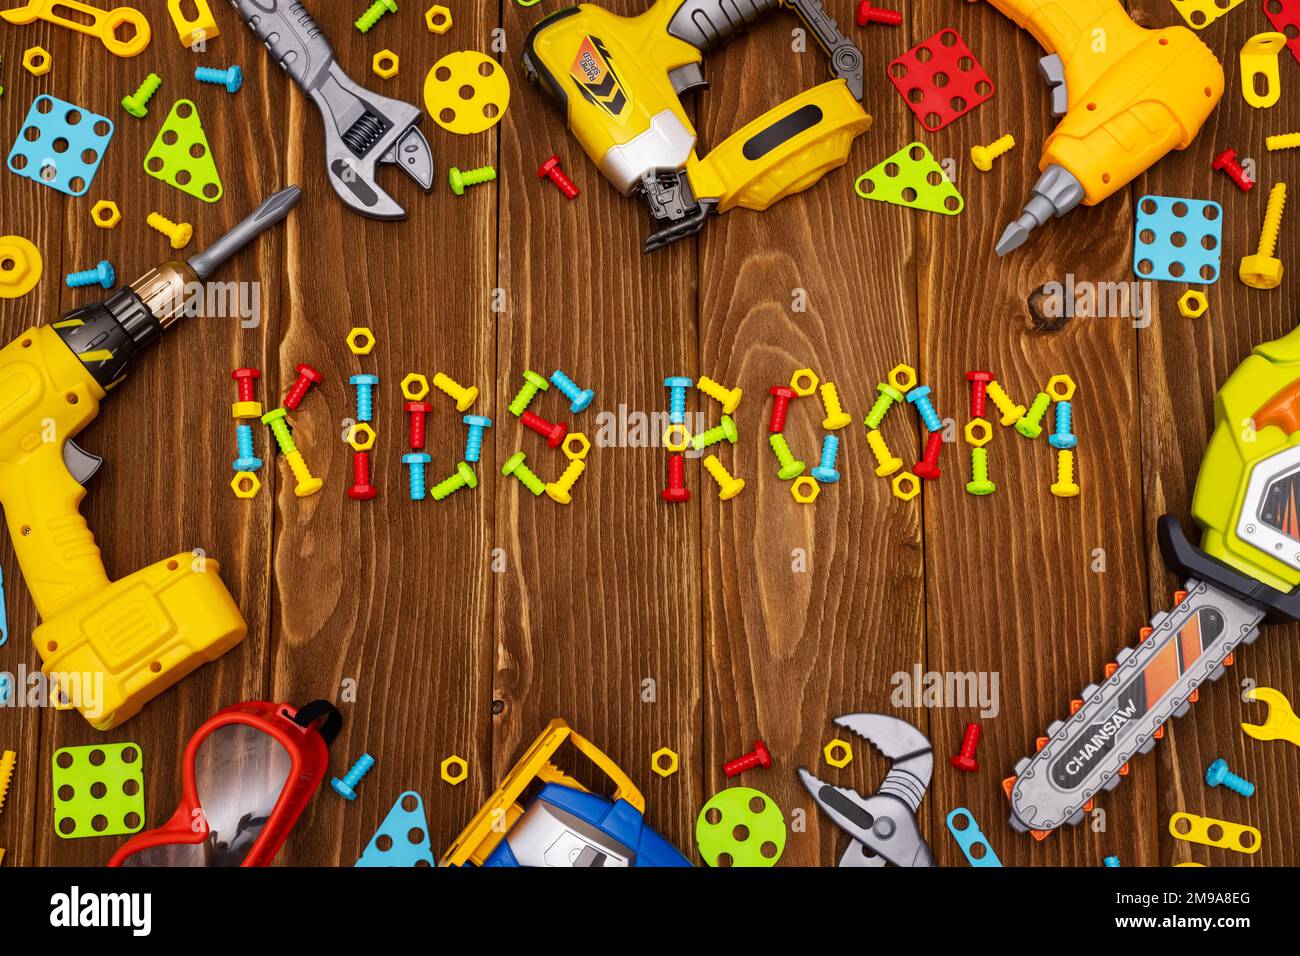 Colorful toy tools as frame with text Kids Room on wooden background Stock Photo